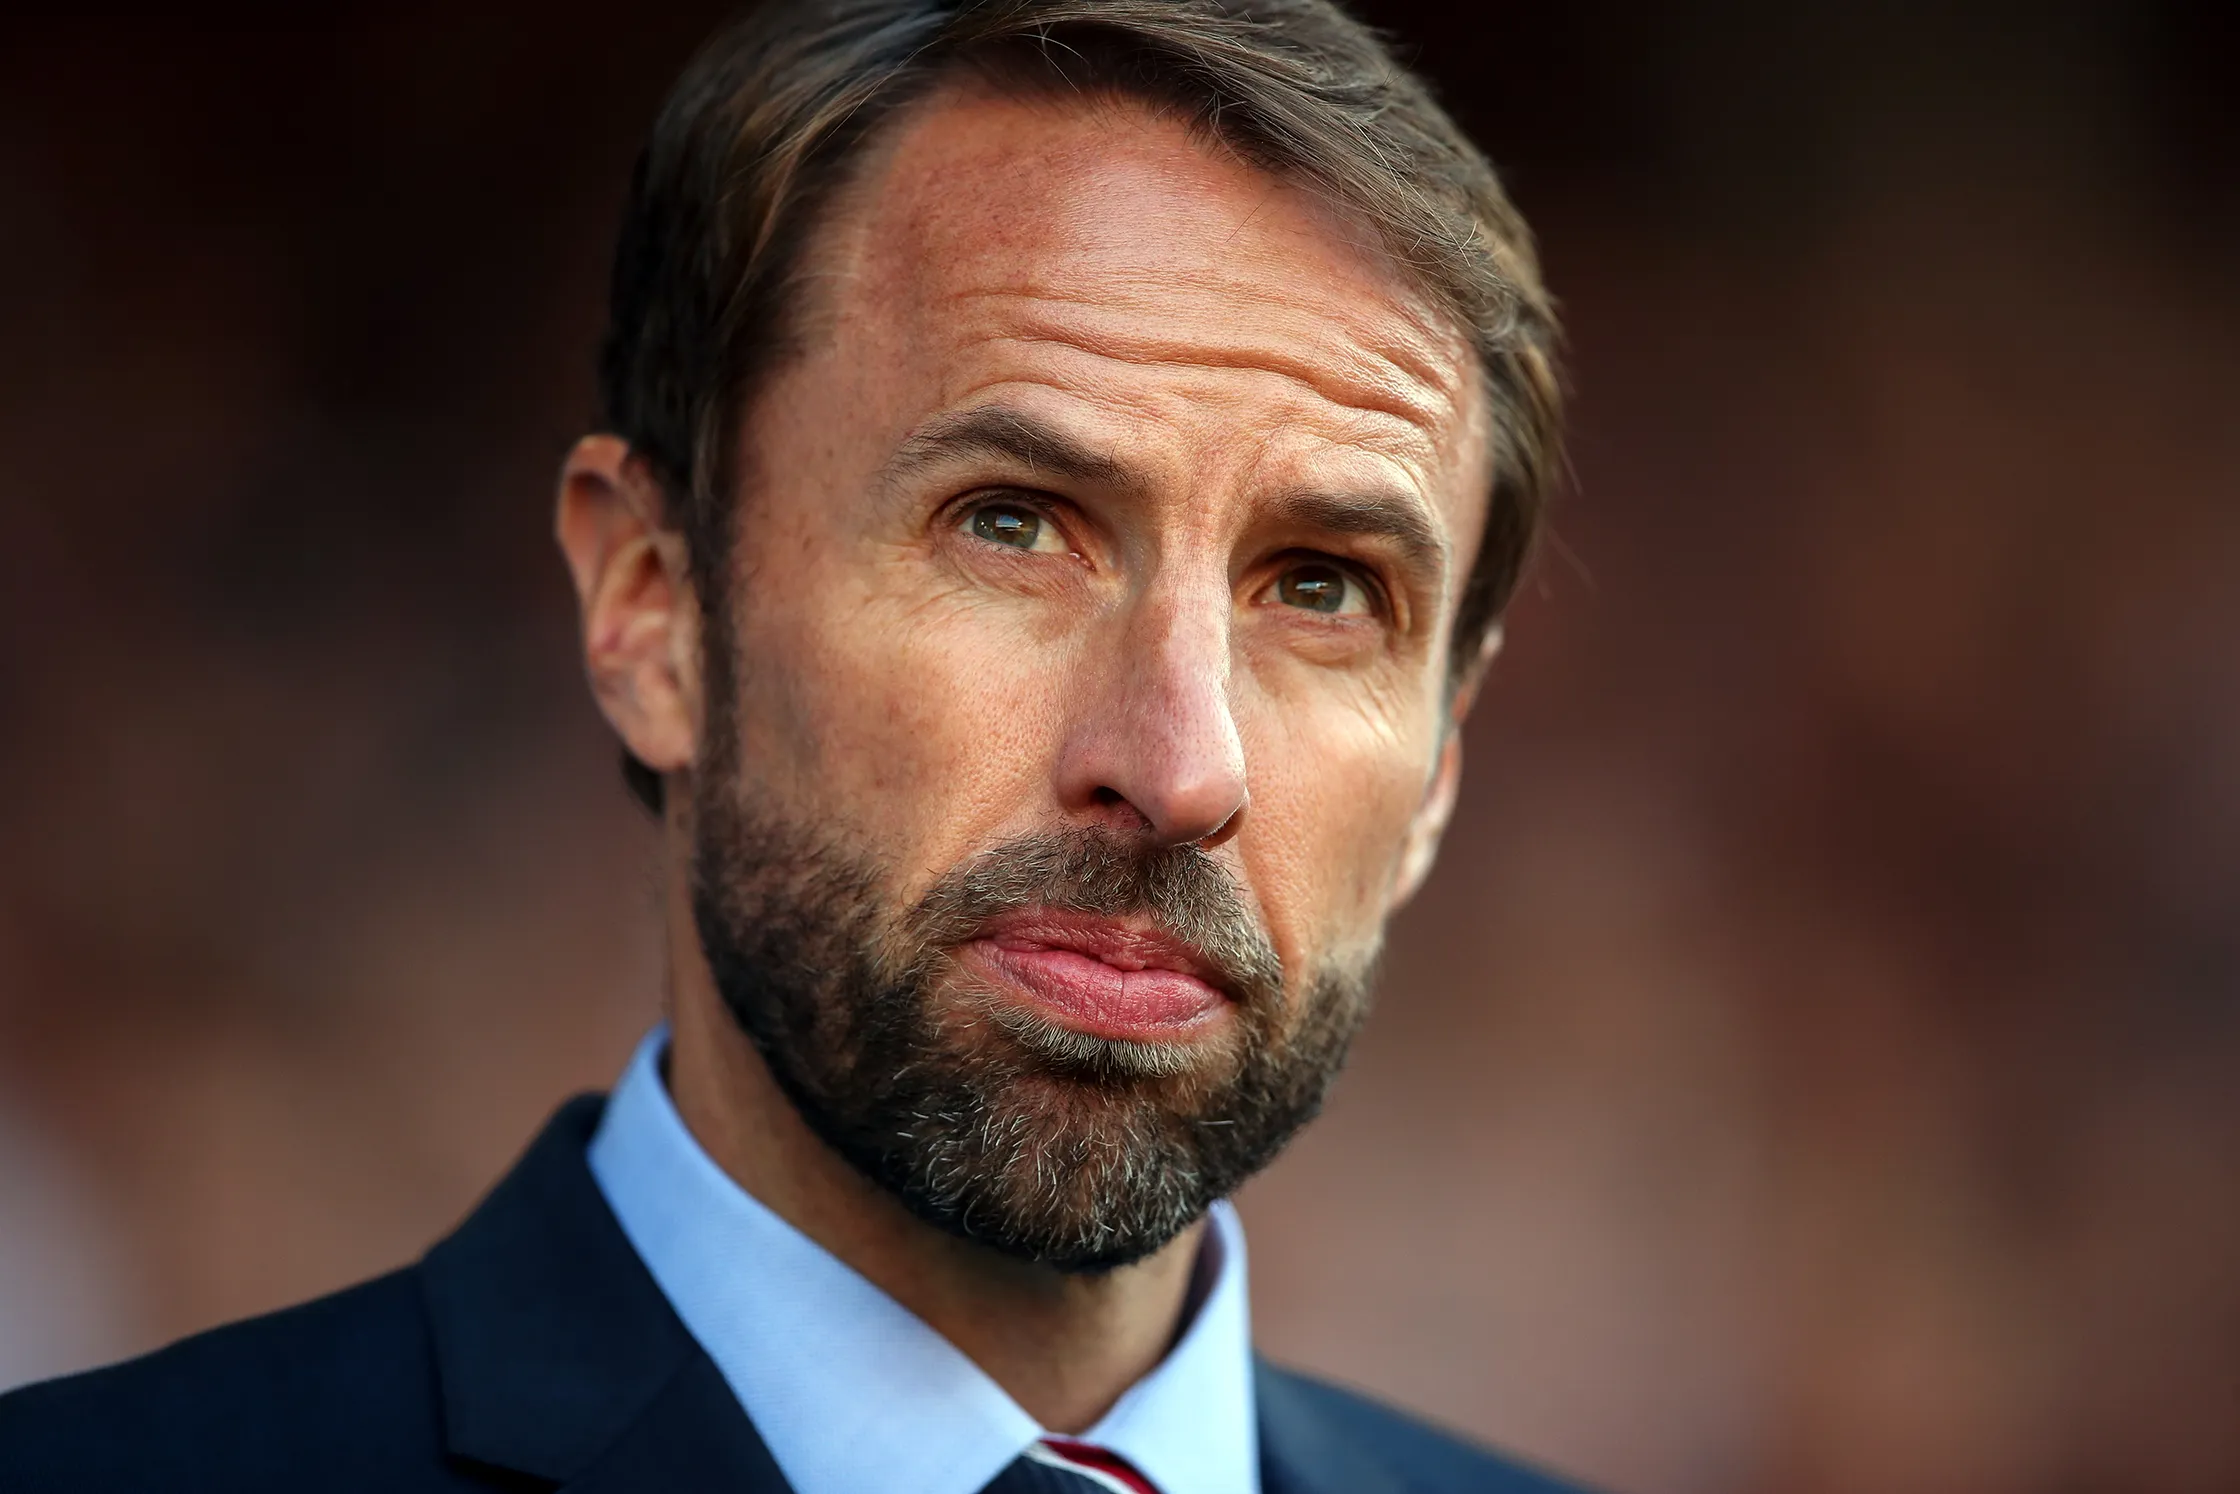 Phillips Gareth Southgate England boss Southgate rejects quest for Morocco coach to learn from him England boss Southgate rejects quest for Morocco coach to learn from him